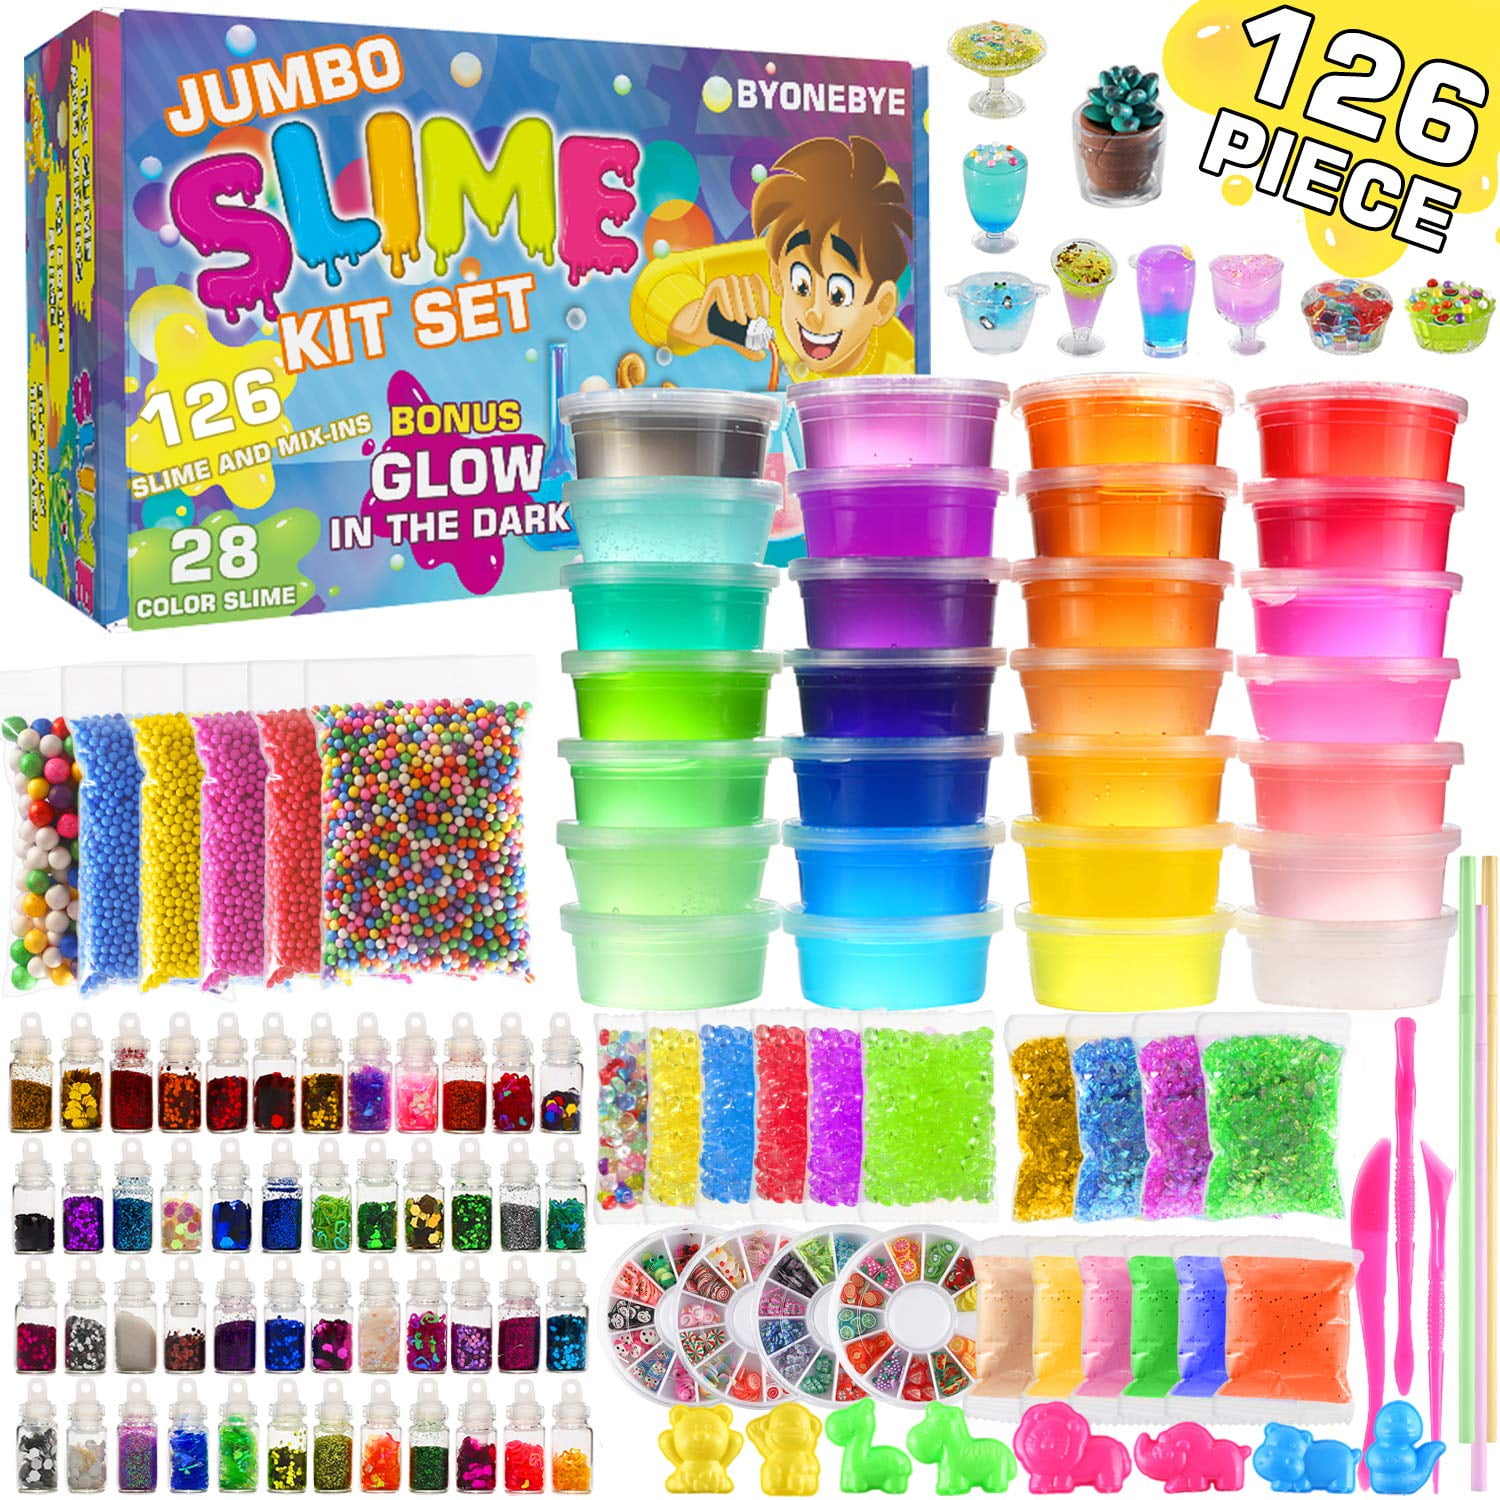 Ultimate Slime Kit with Complete Supplies for DIY Make Your Own Slime Premium S 